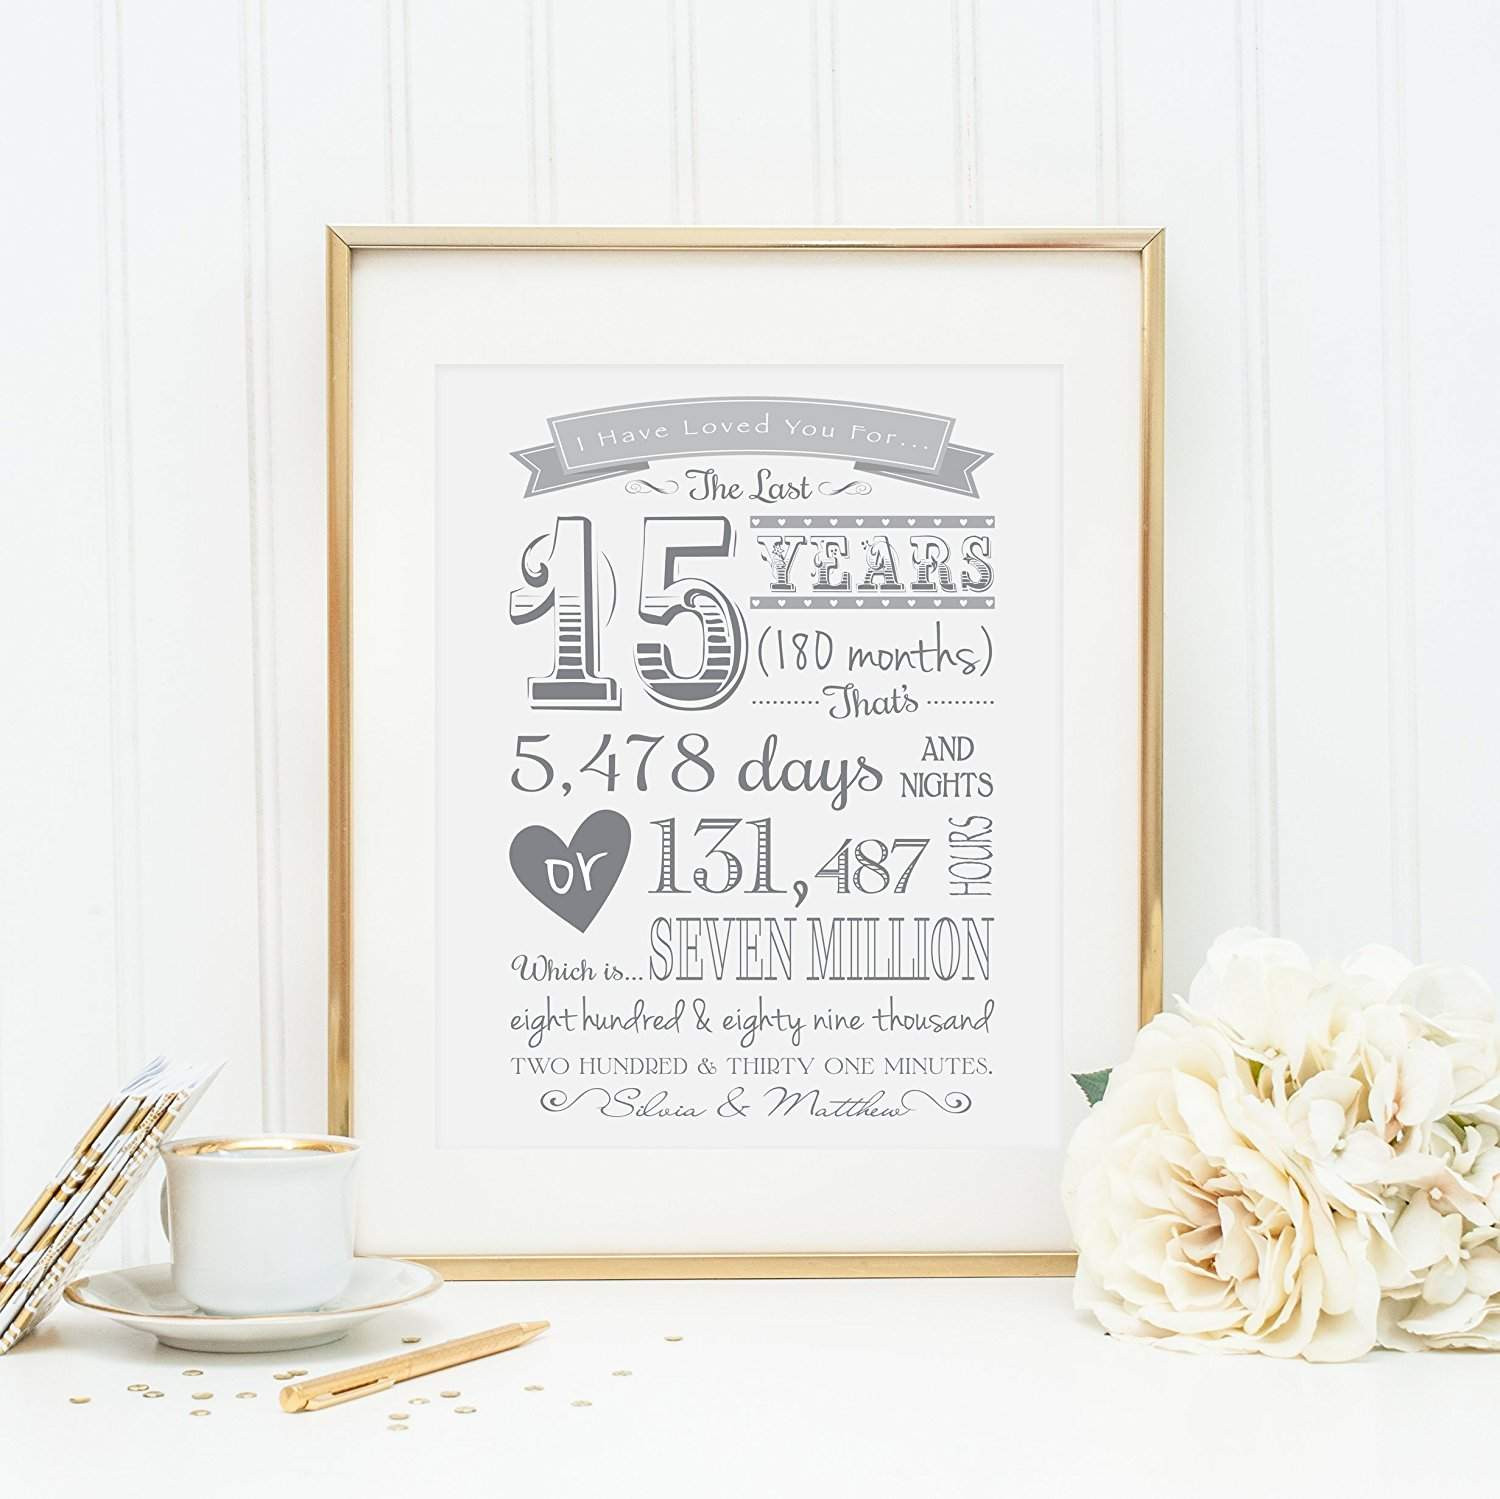 Wedding Gift For Bride From Groom
 Best Wedding Day Gift Ideas From the Groom to the Bride